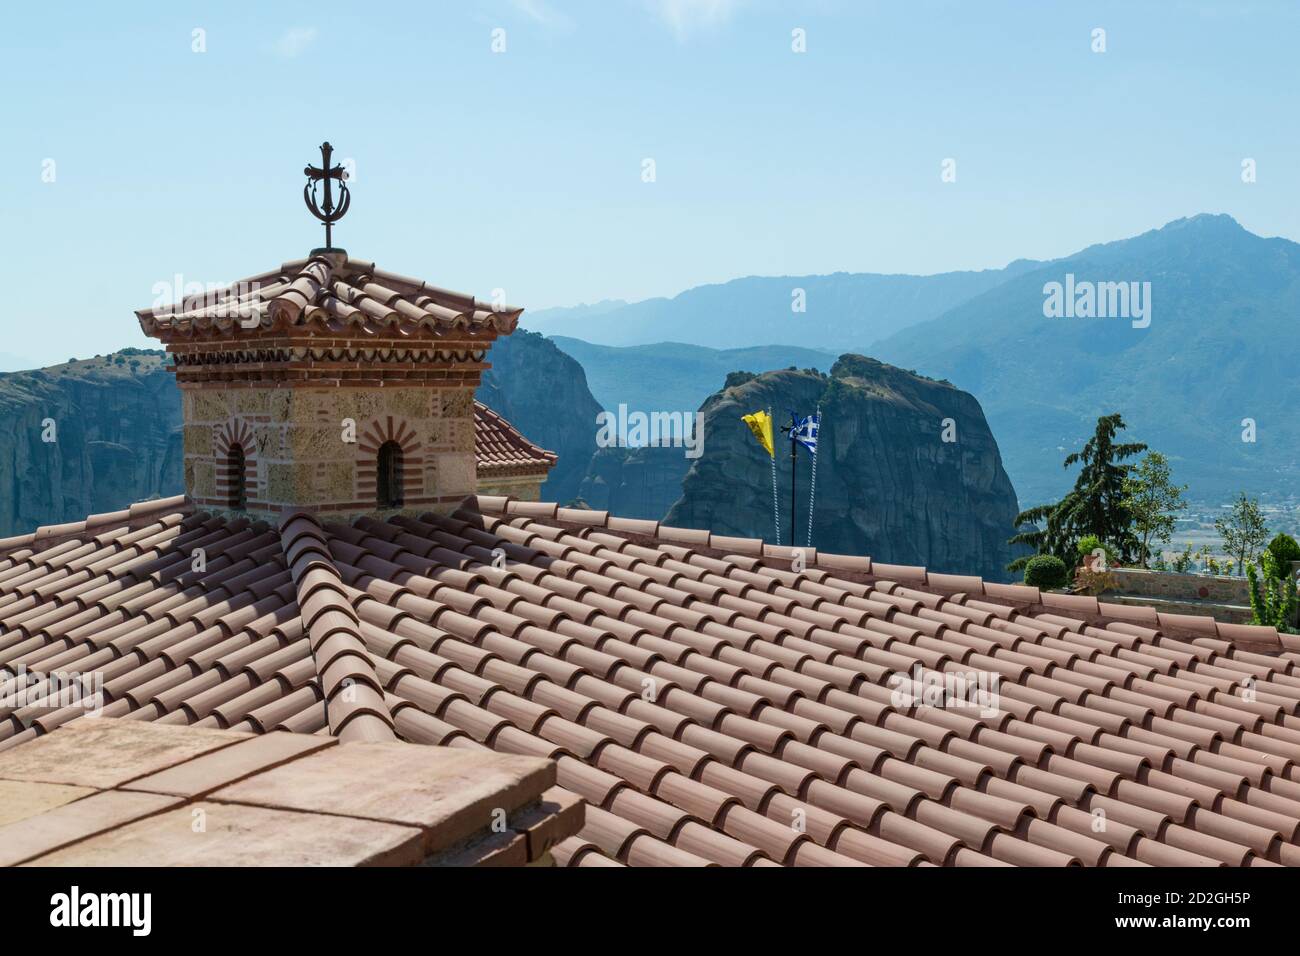 Tiles and cross on roof of the Holy Monasteries of Meteora, Trikala, Greece. Stock Photo